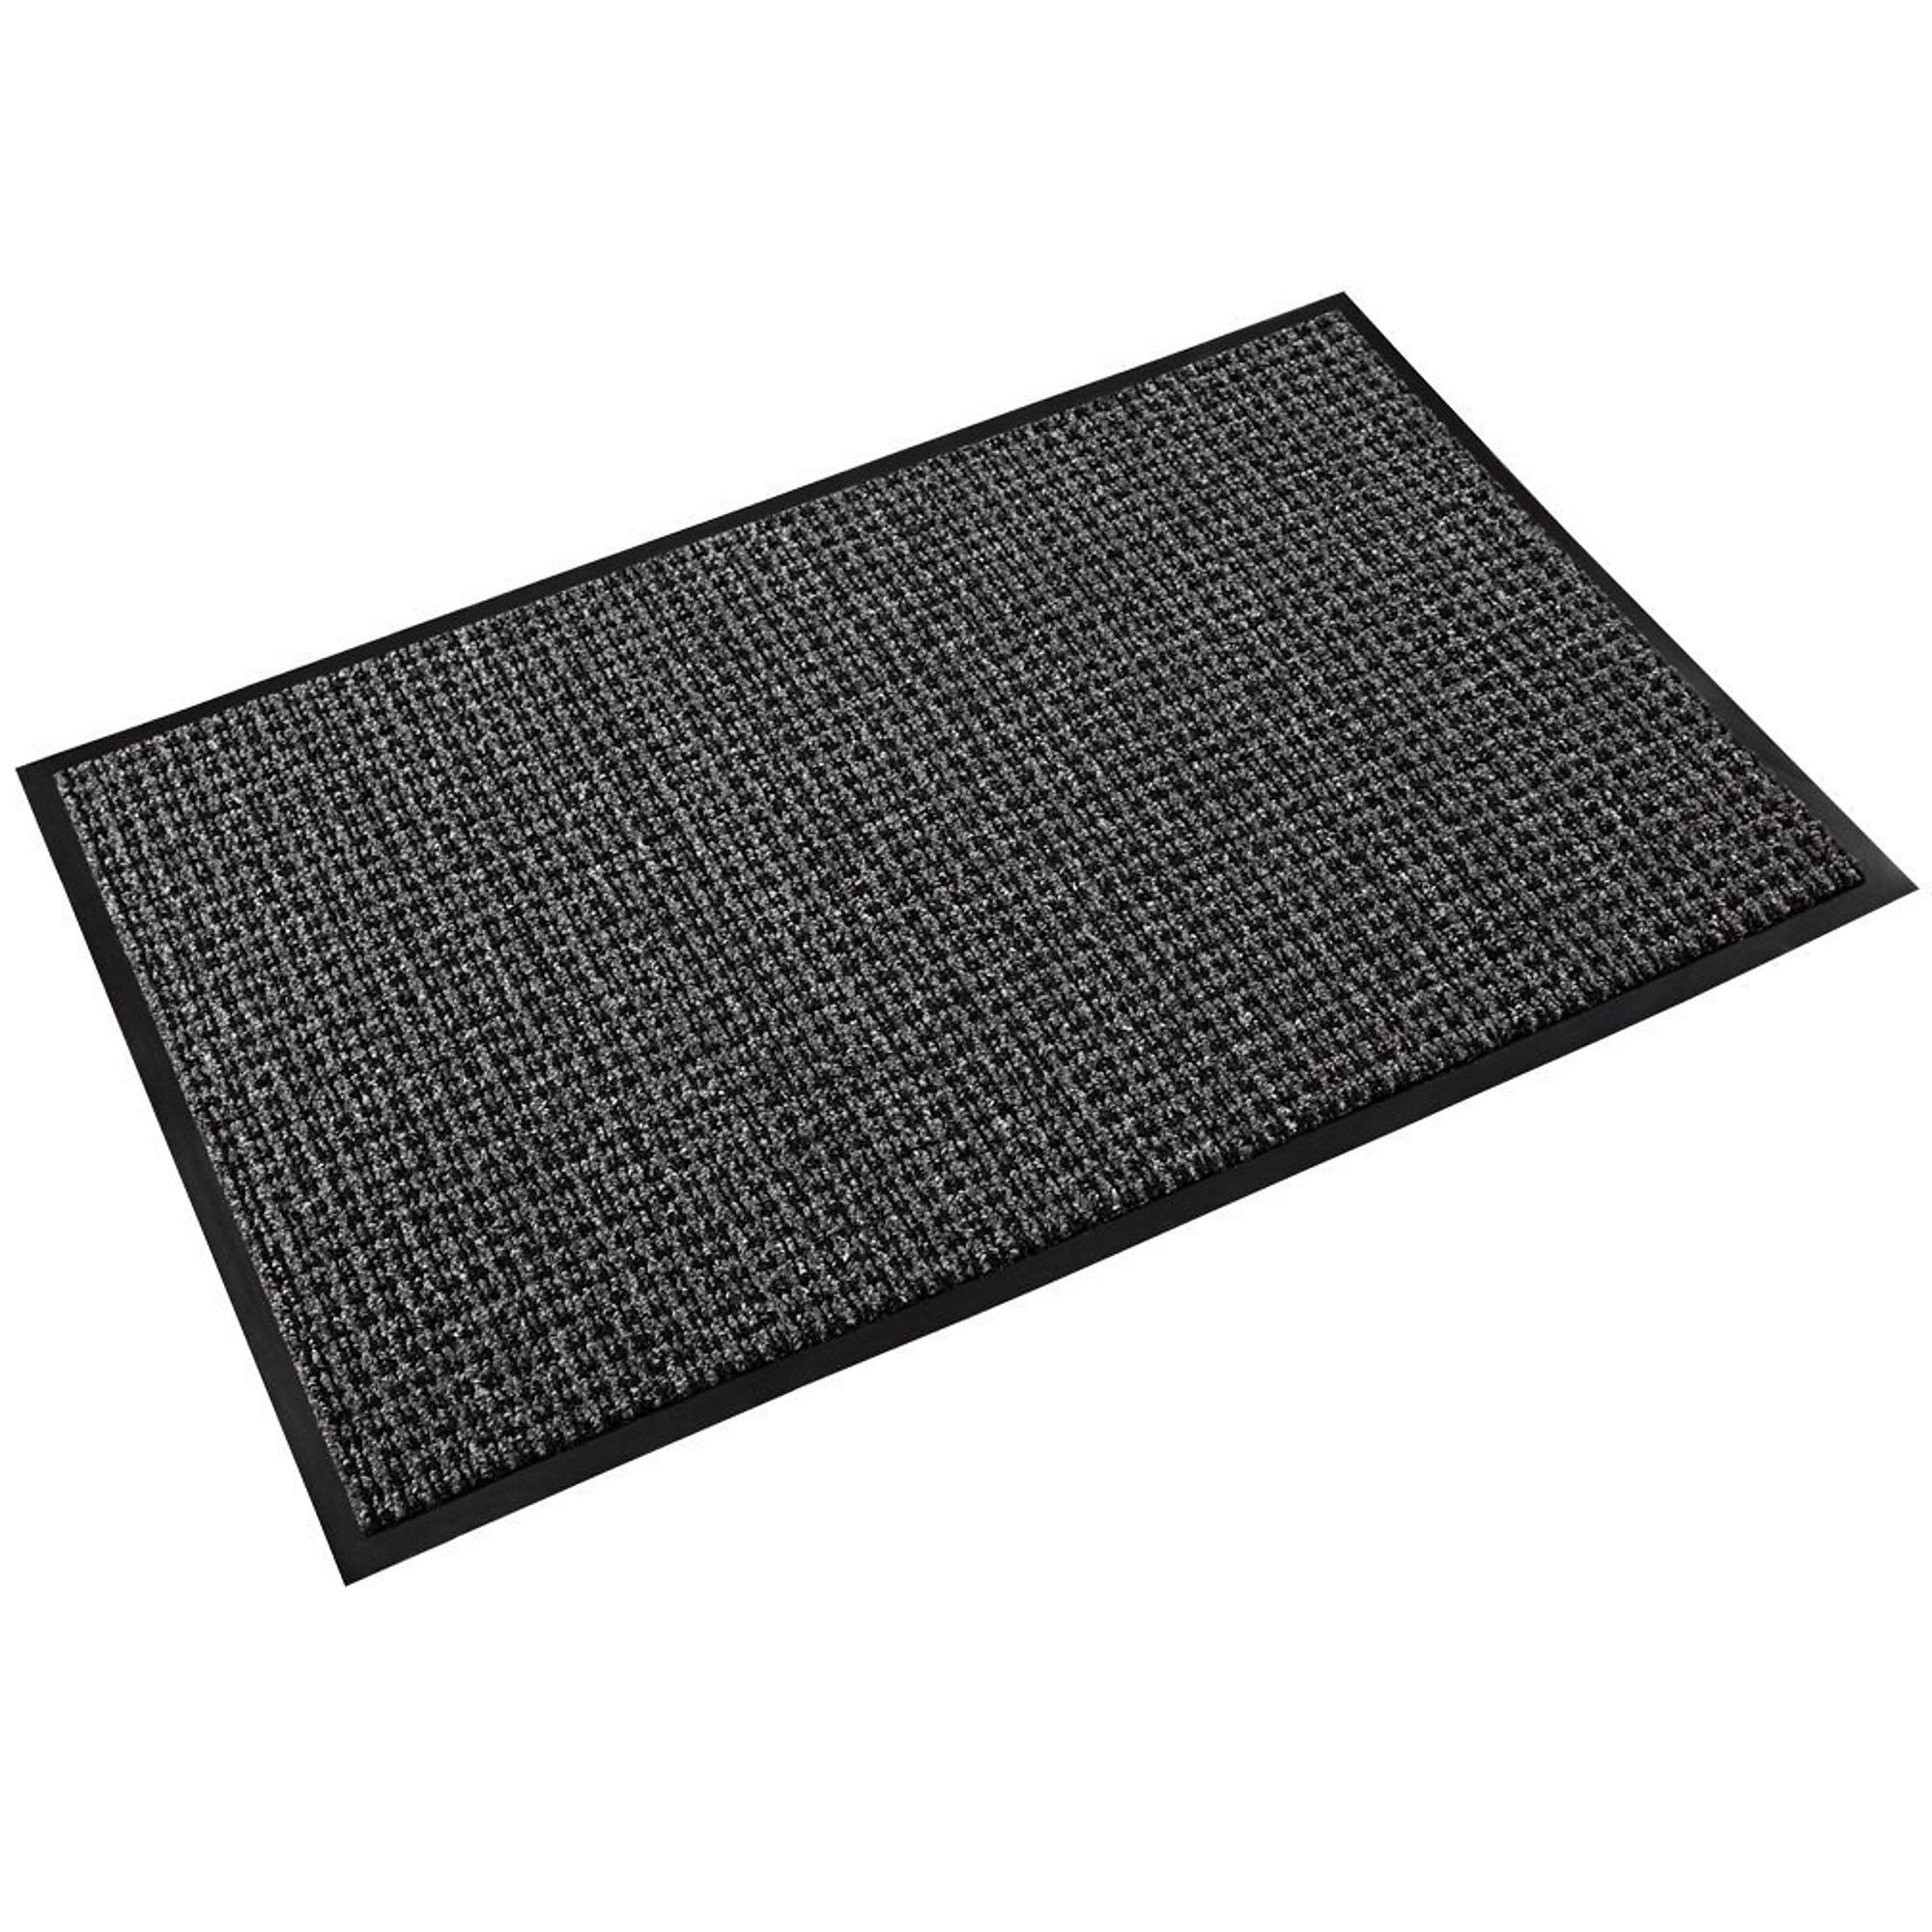 Crown Matting Technologies, Oxford Elite 2ft.x3ft. Black/Gray, Width 24 in, Length 36 in, Thickness 7/16 in, Model OE 0023GY